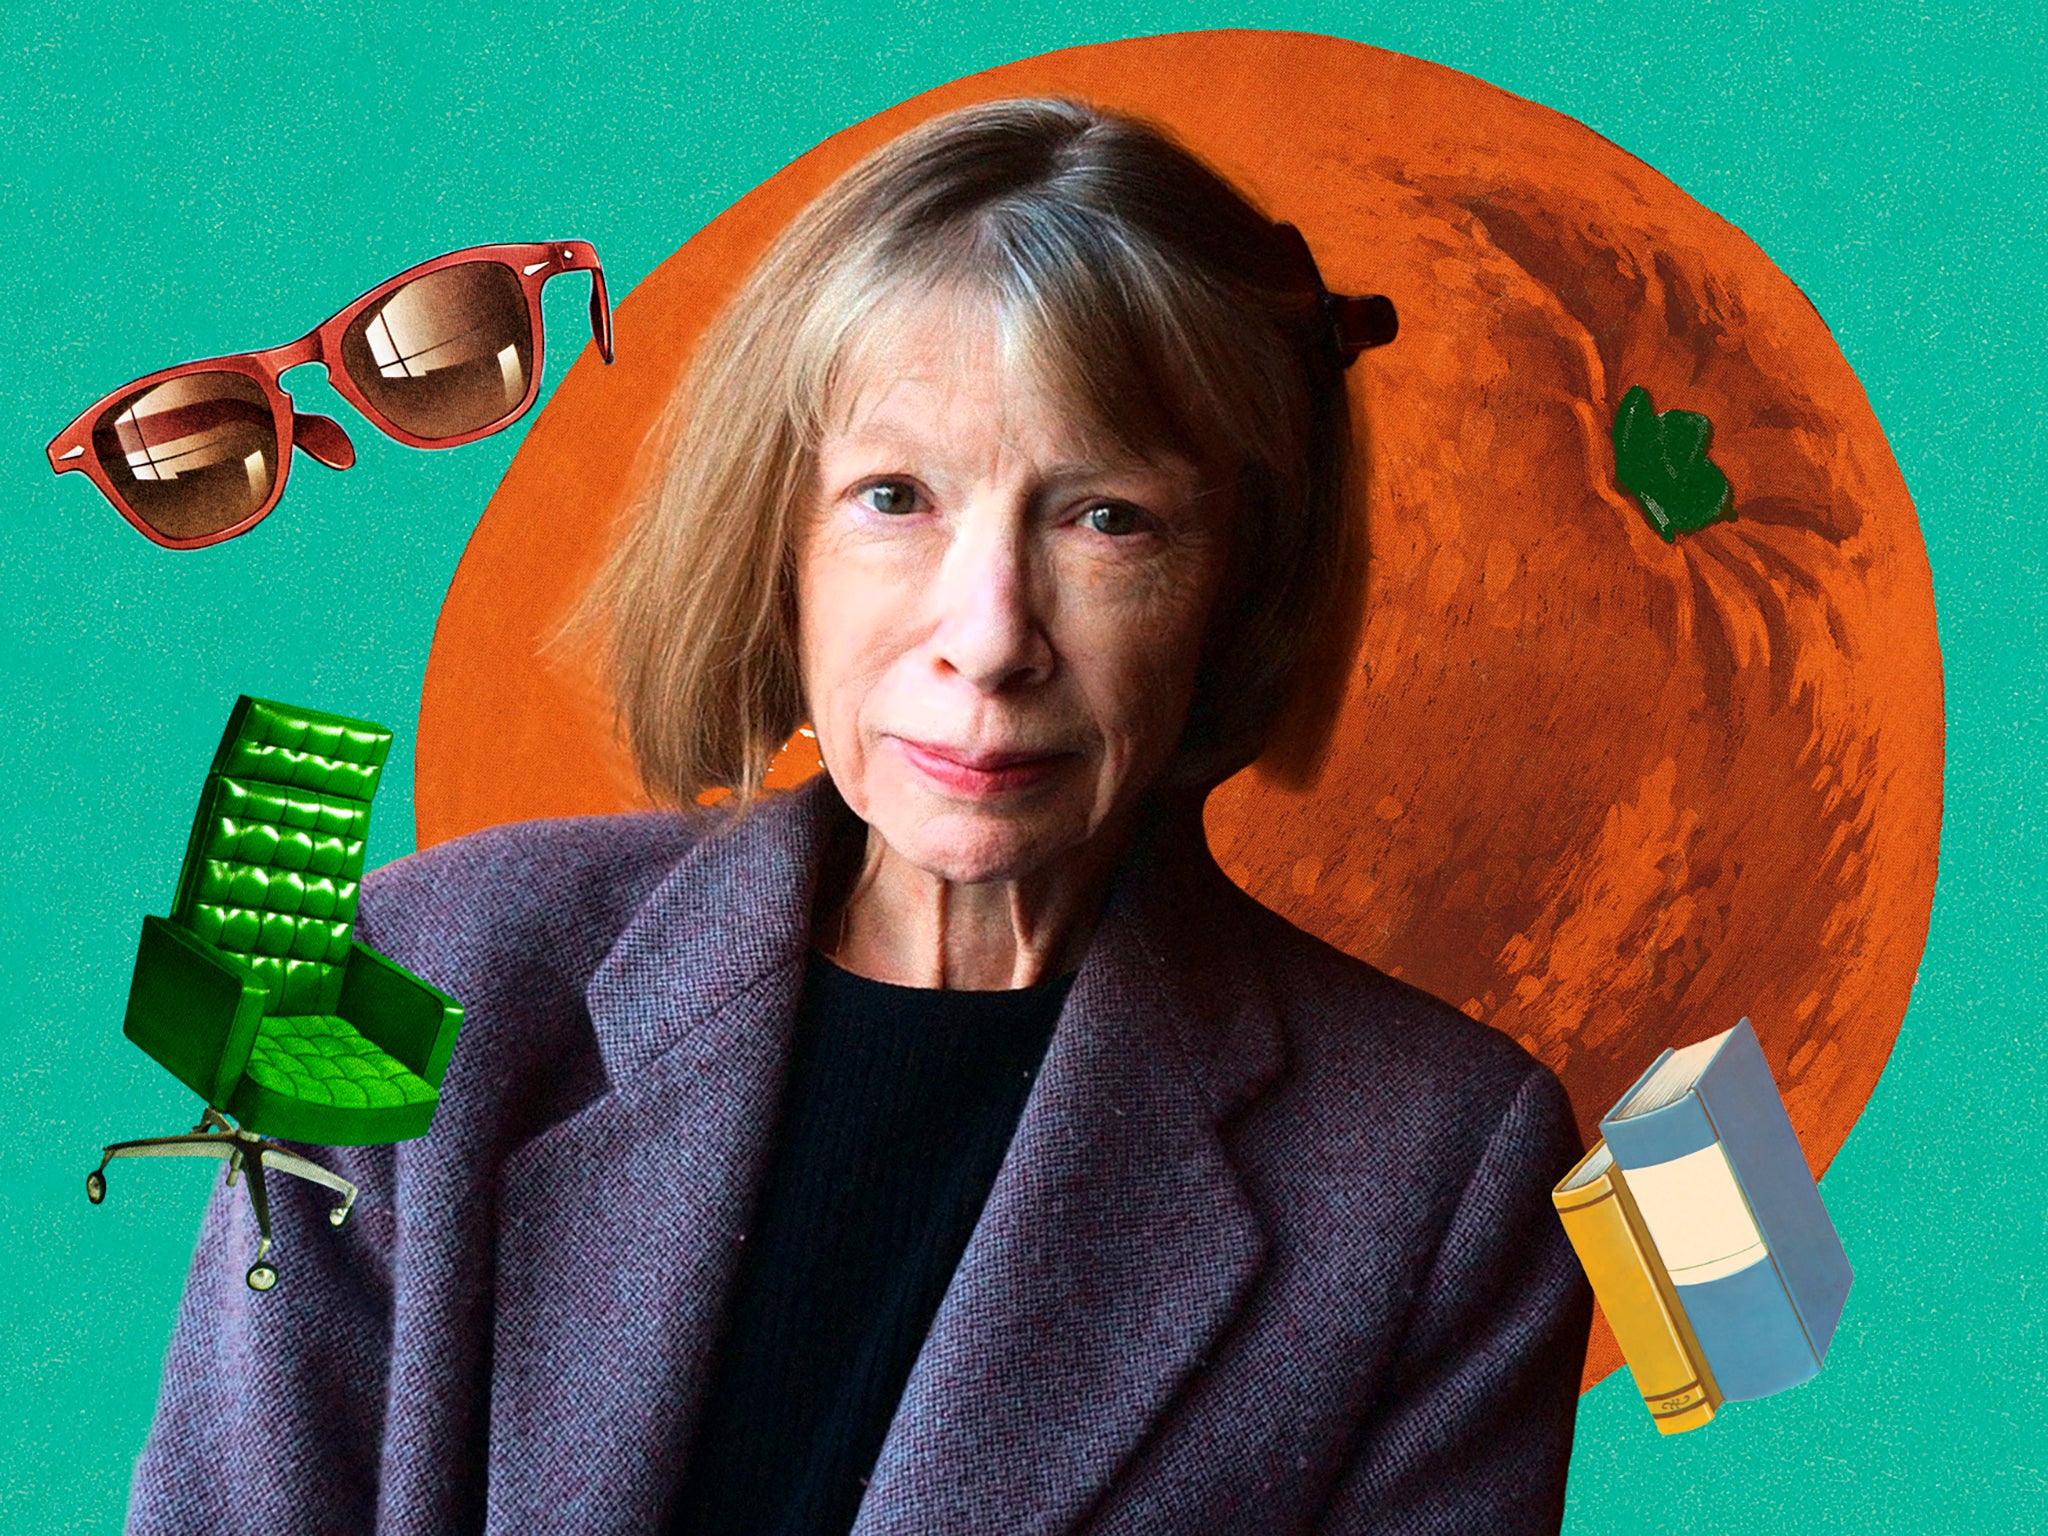 ‘I spent hours clicking through the catalogue with a voyeuristic dedication as embarrassing to me as it would be to the famously aloof Didion herself’